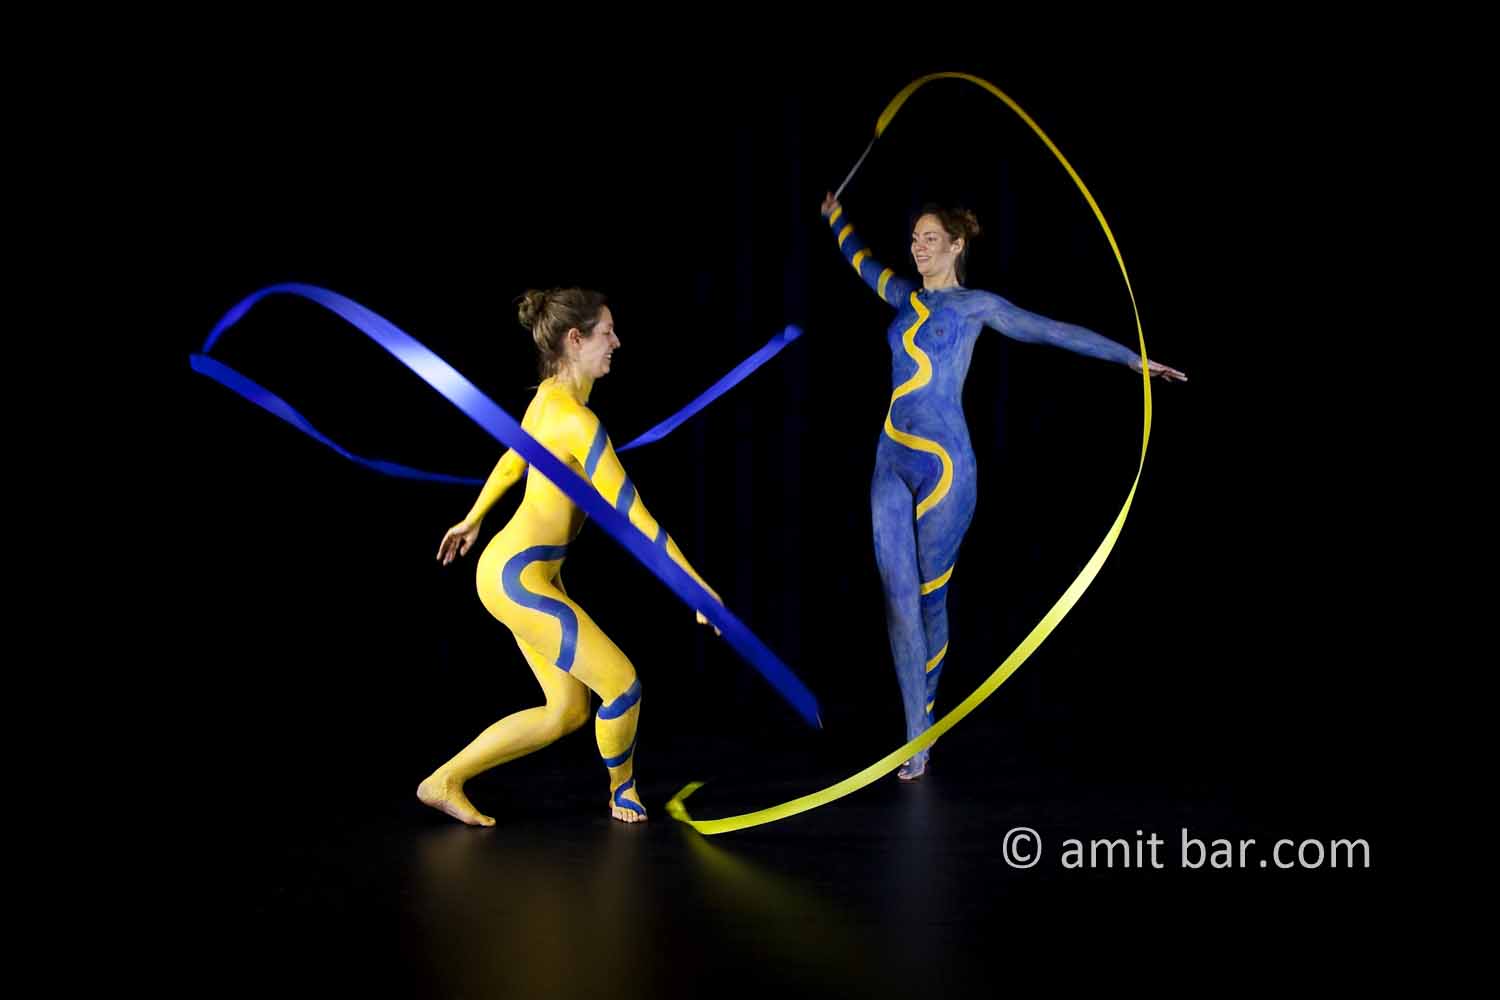 Two ribbons IV: body-painted dancers with ribbons